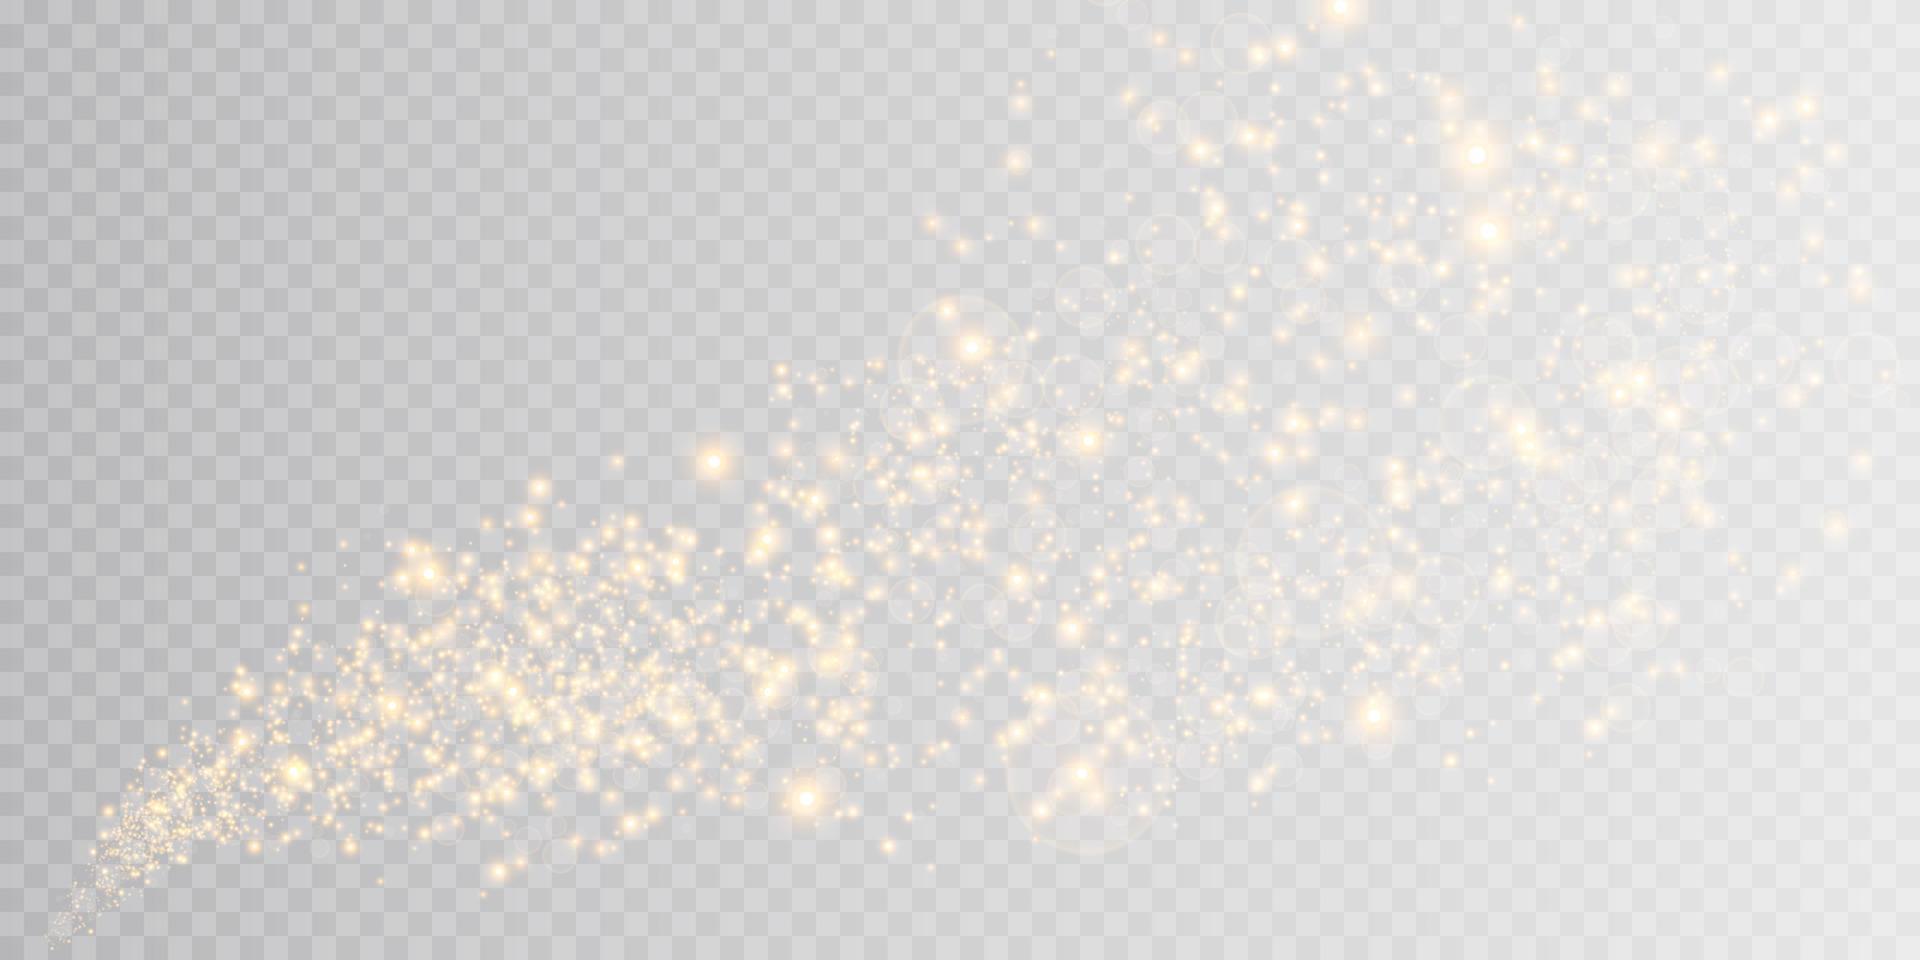 Glow magic light effect. Star dust. Vector glowing sparkles.